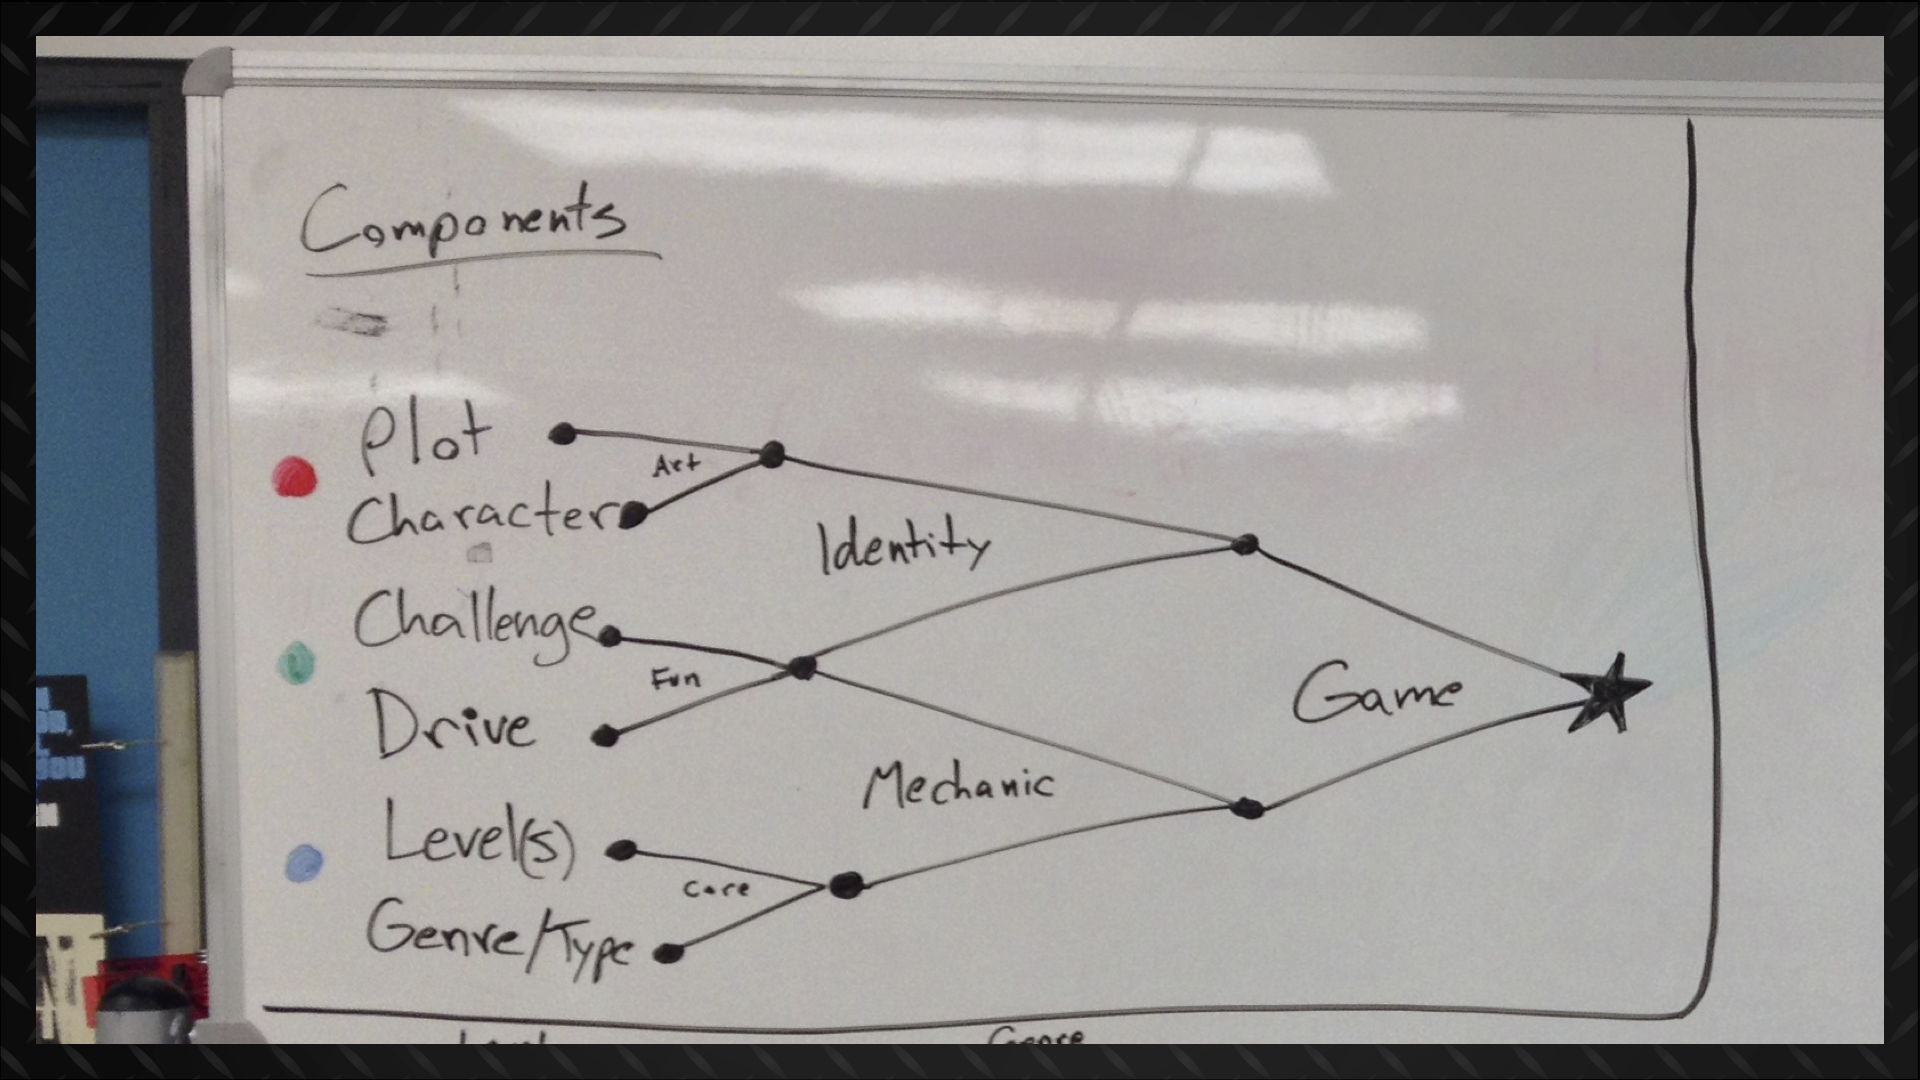  We began by outlining the six core components of what goes into a video game, then condensed into three and then two sections, eventually arriving at the completed game. 